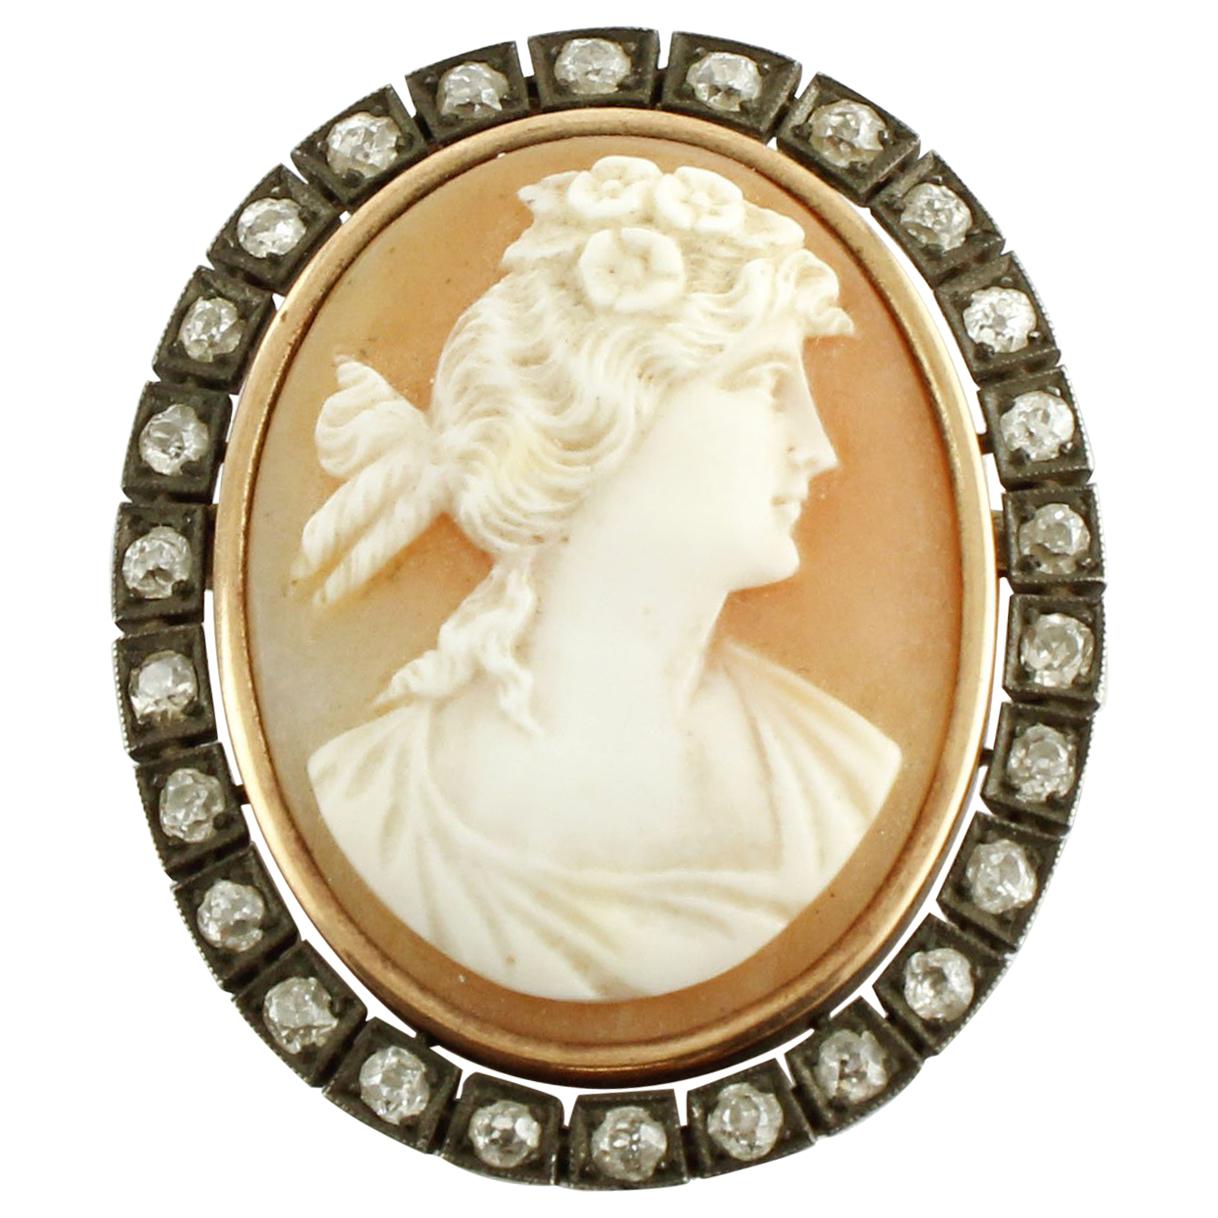 1.05 Carat Diamonds, 3.5 G Carved Cameo, Rose Gold and Silver Retrò Brooch For Sale